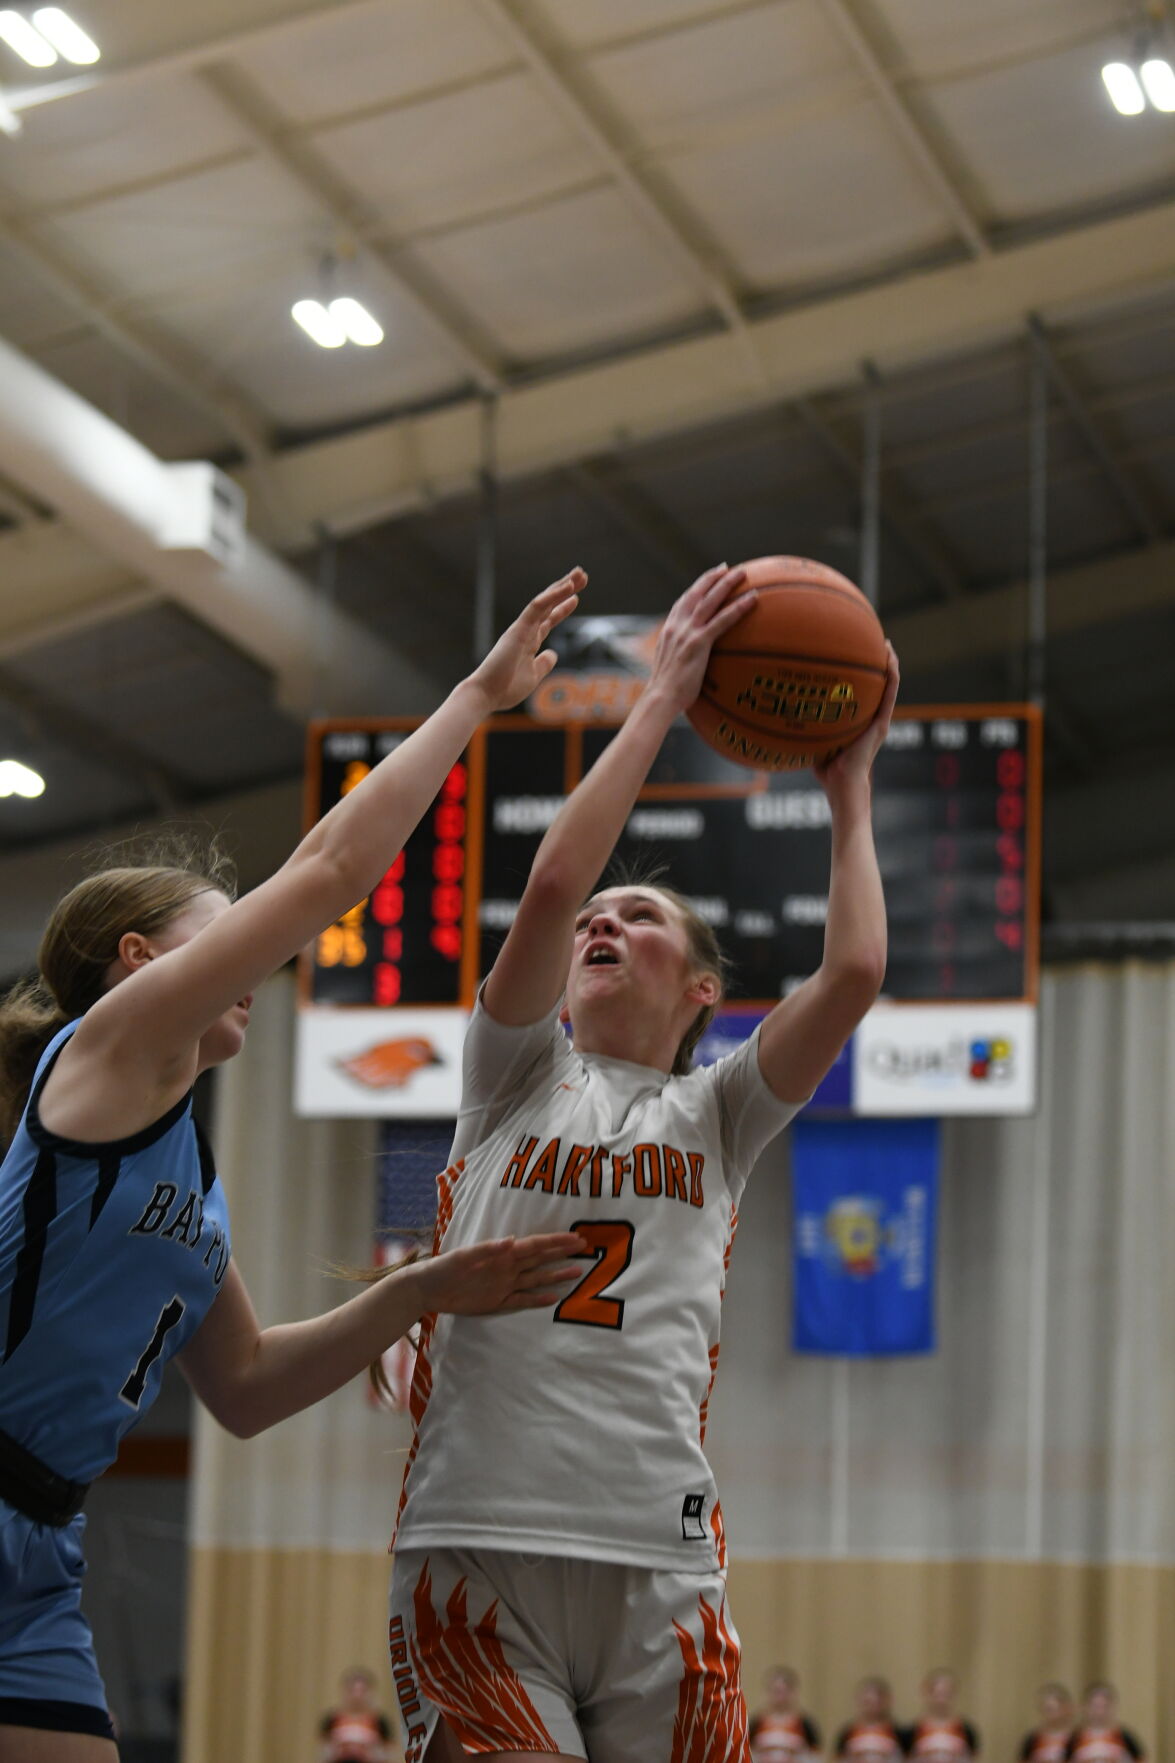 Hartford Union Dominates with 71-51 Win in Girls Basketball Playoff, eyes De Pere Clash Next